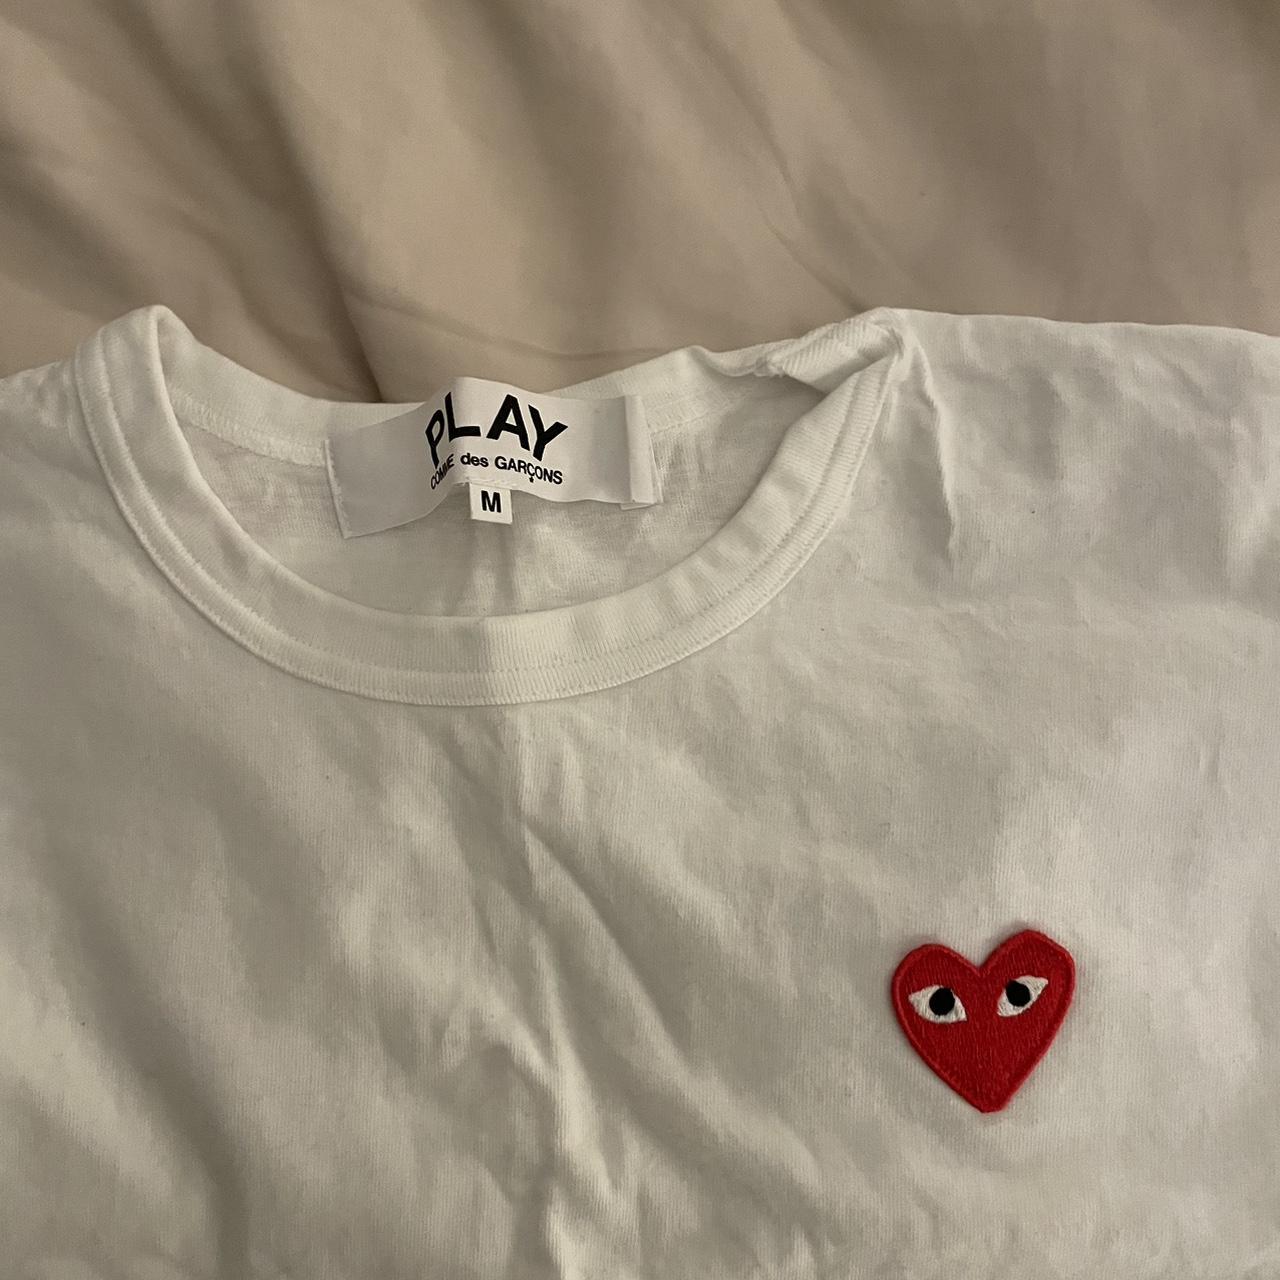 CDG PLAY men’s shirt in size medium, worn once and... - Depop